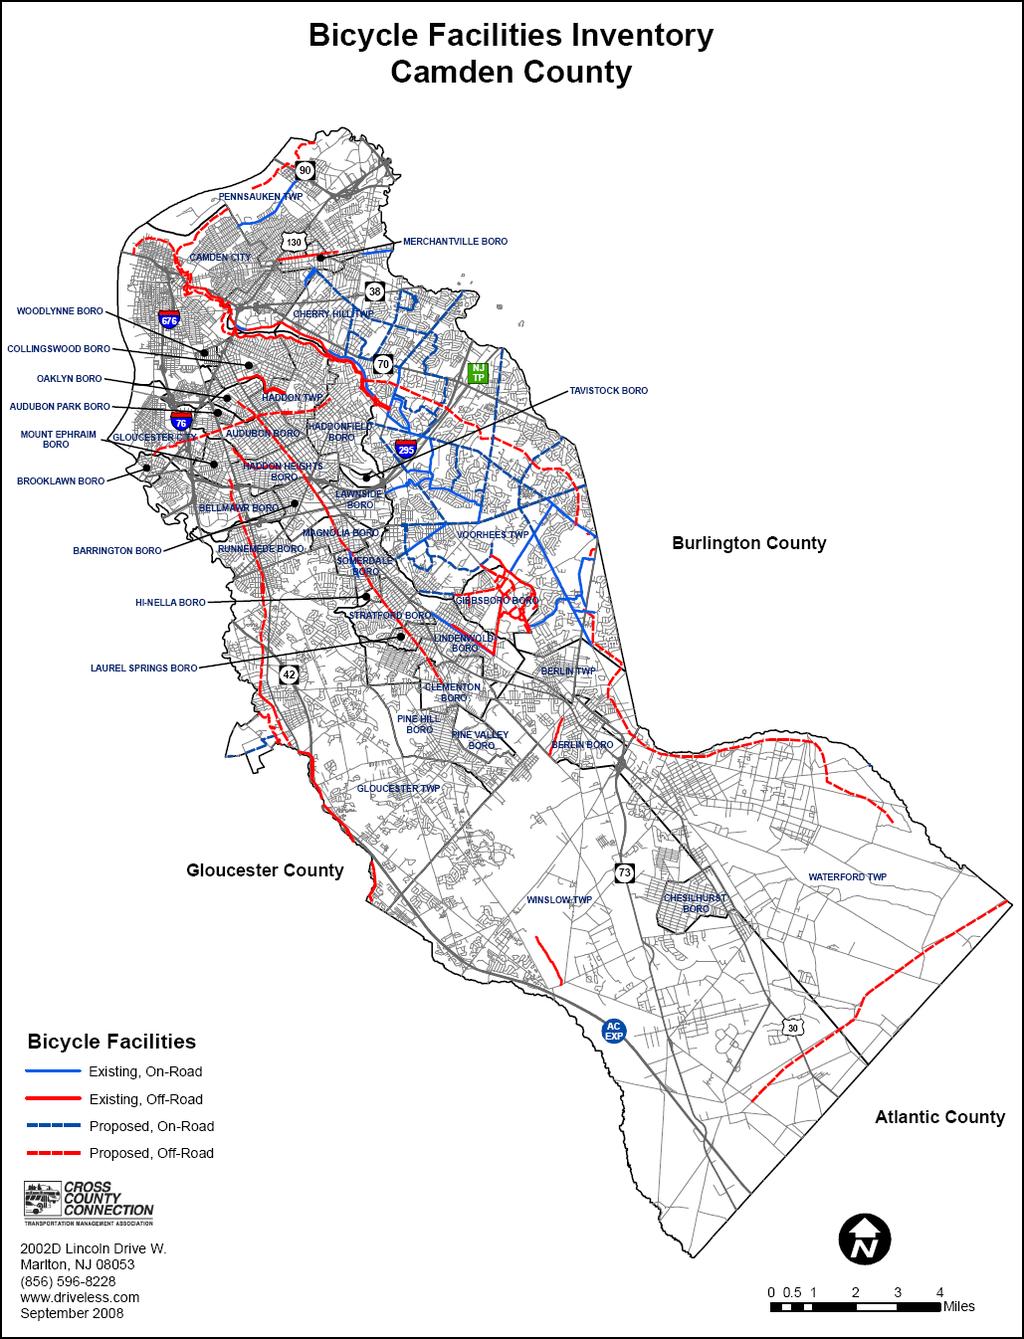 Camden County: Bicycle Facilities Inventory, 2008 Source: Cross County Connection, Bicycle